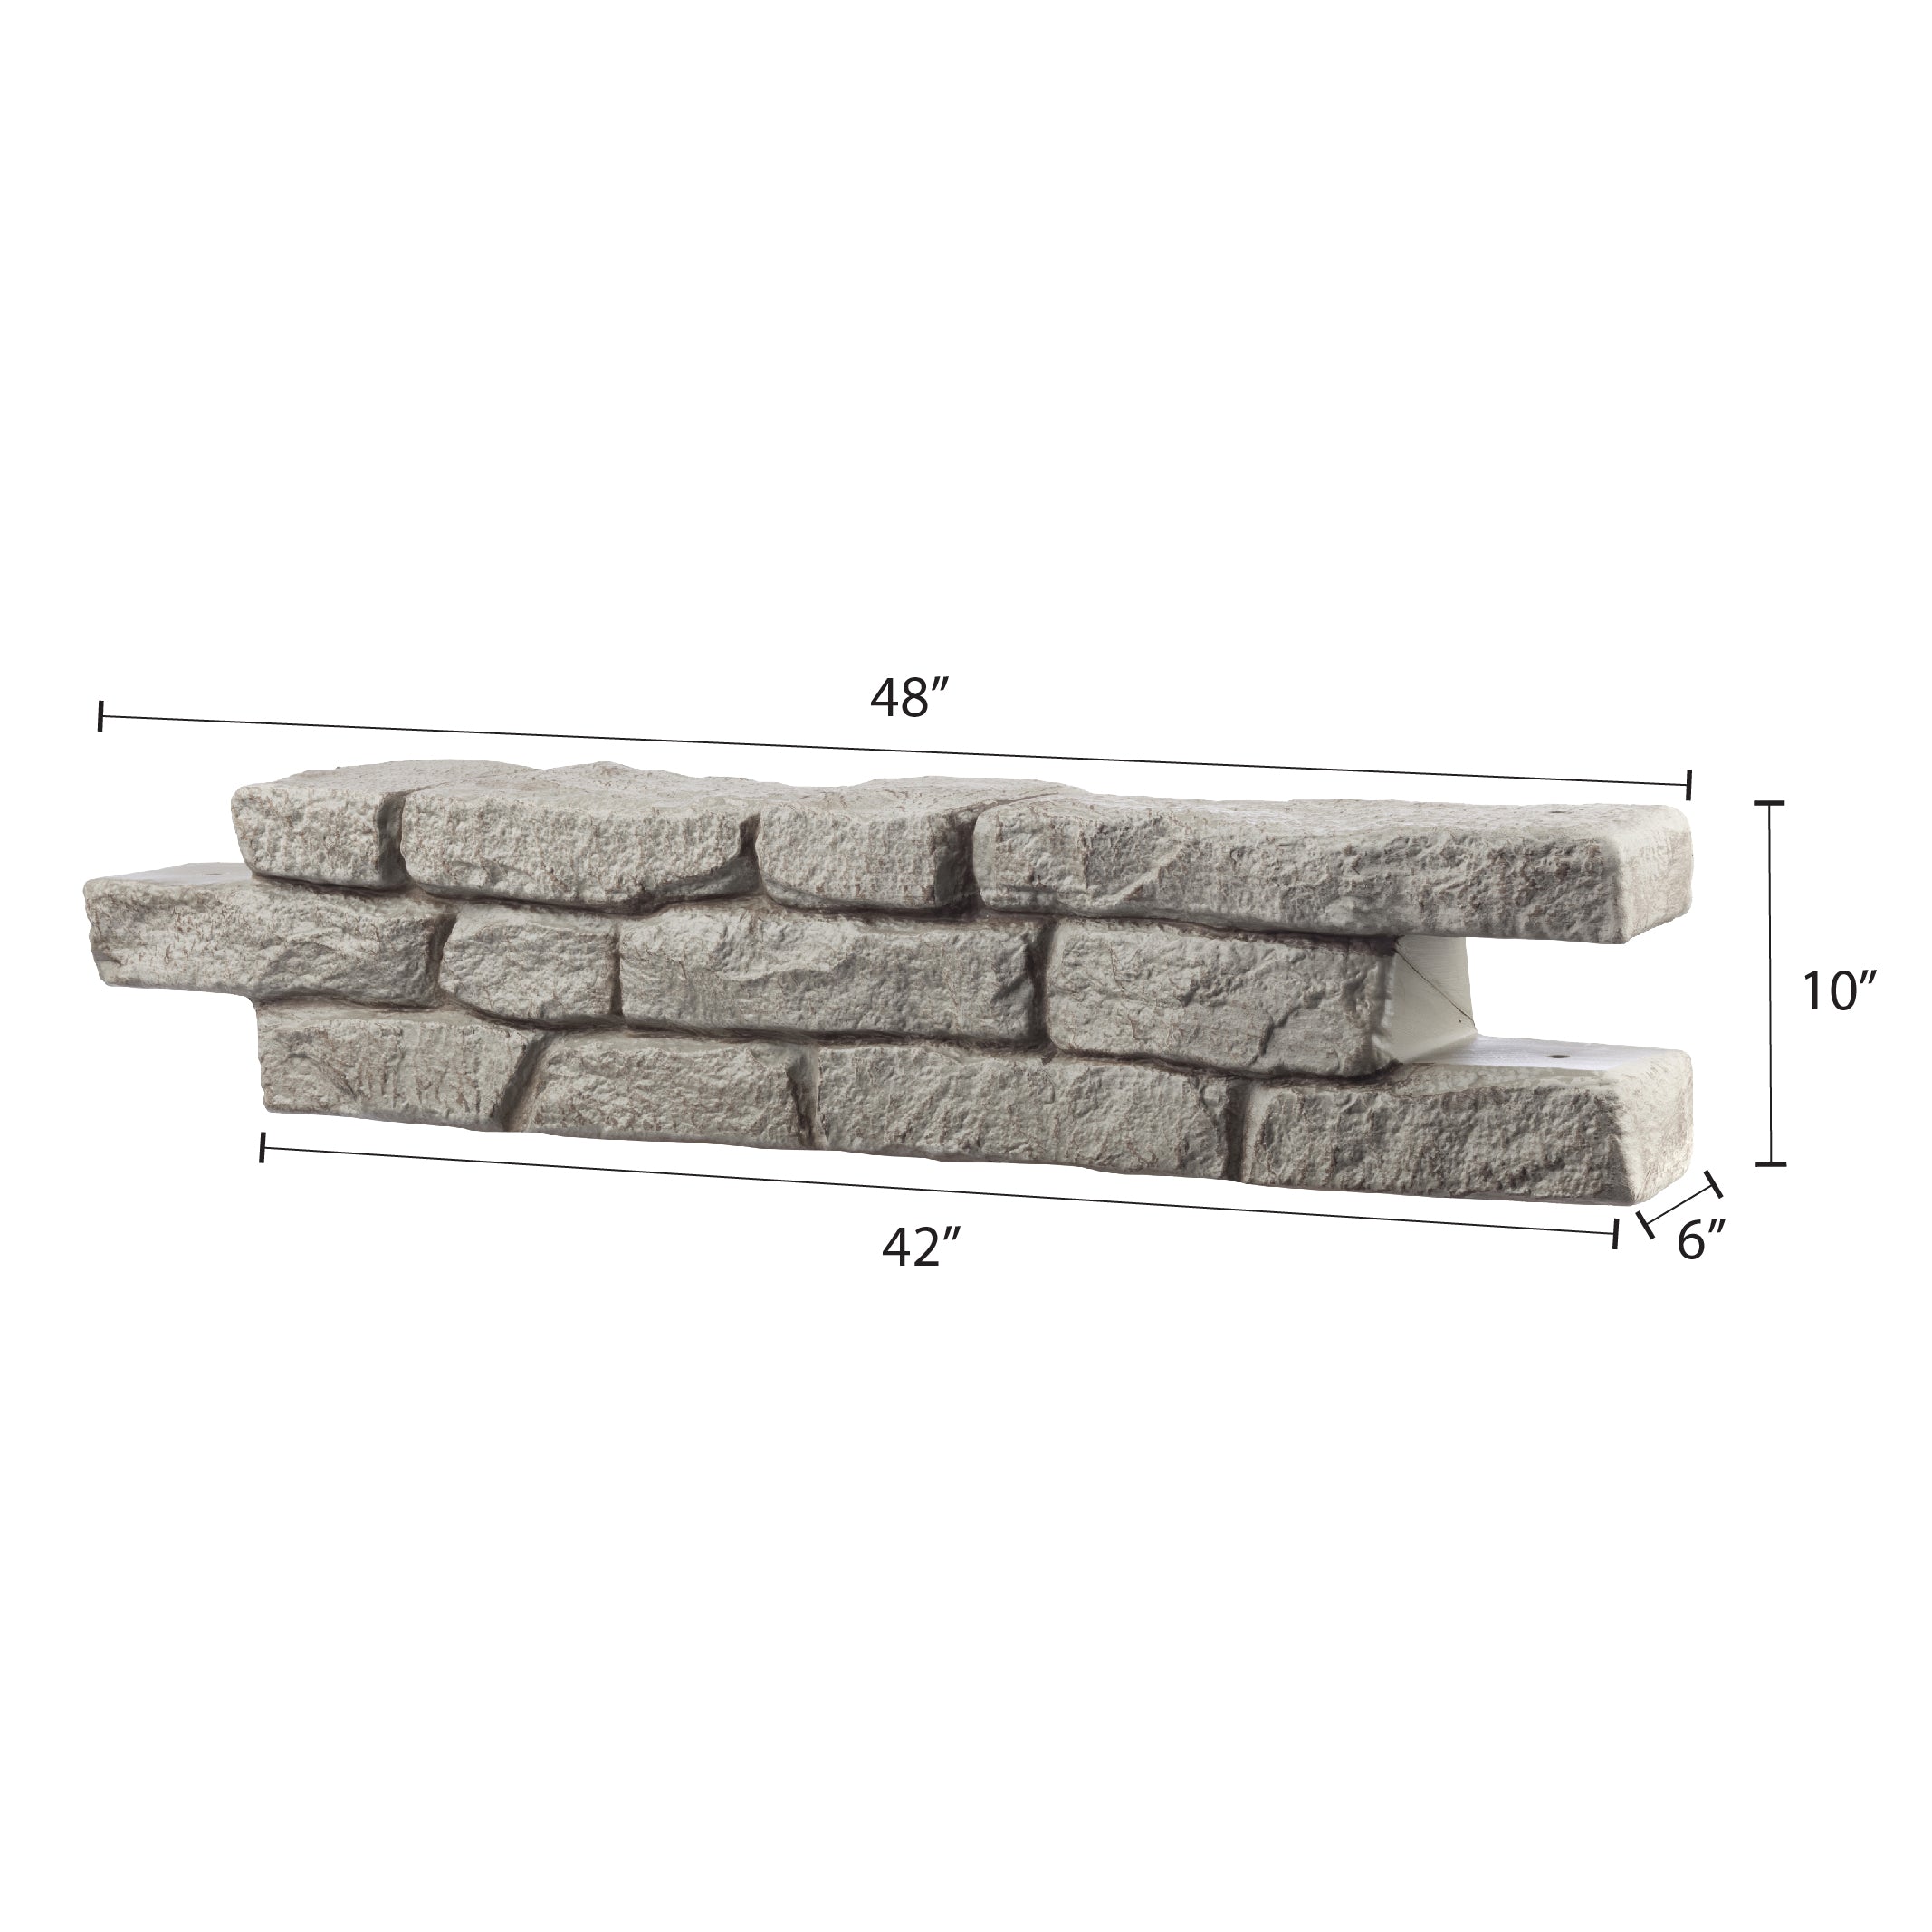 Rock Lock Raised Garden Bed Kit - 48 inch Square, 20 inch High